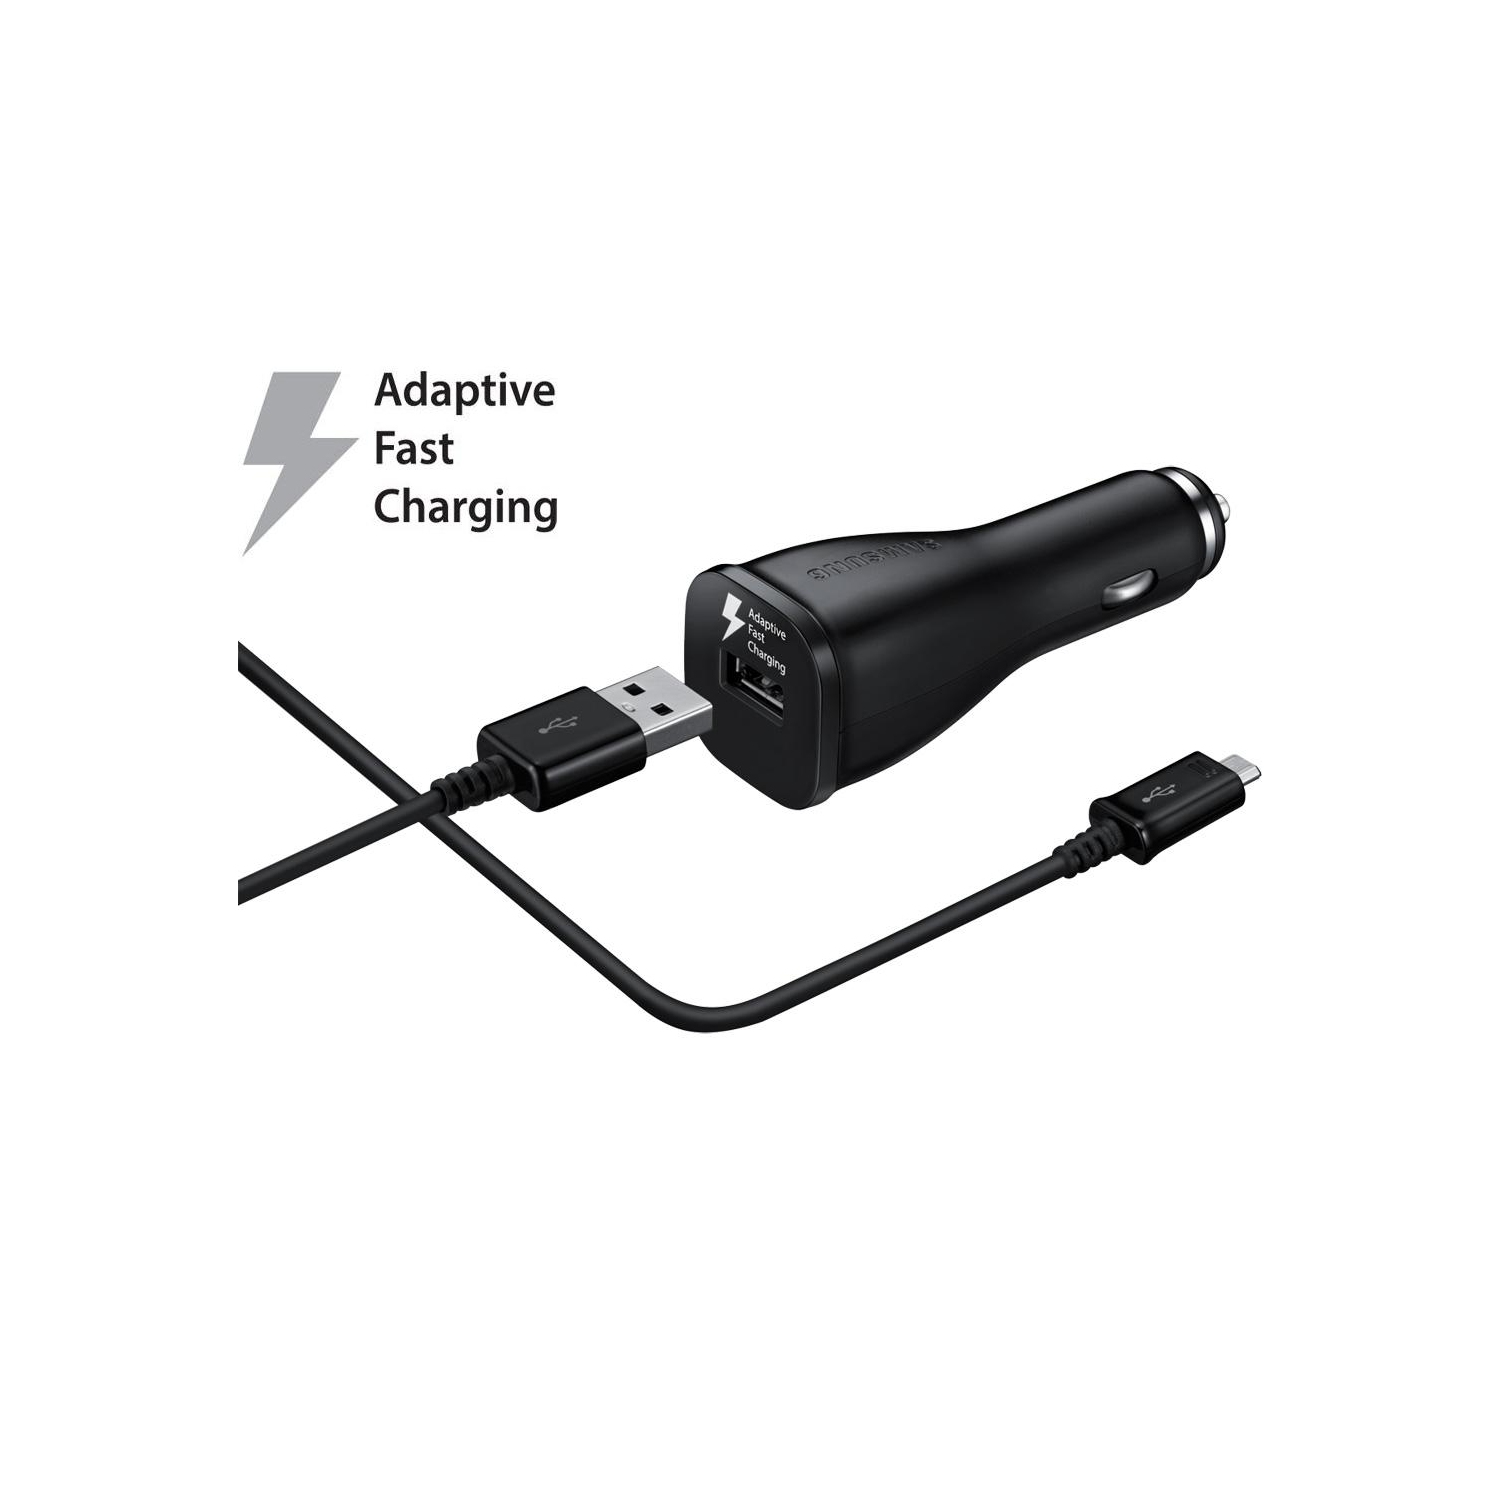 QC2.0 15W Adaptive Fast Car Charger Set & Mirco USB Cable for Samsung Galaxy S4 S6 S7 Edge Plus / Note 4 5 Edge, Black